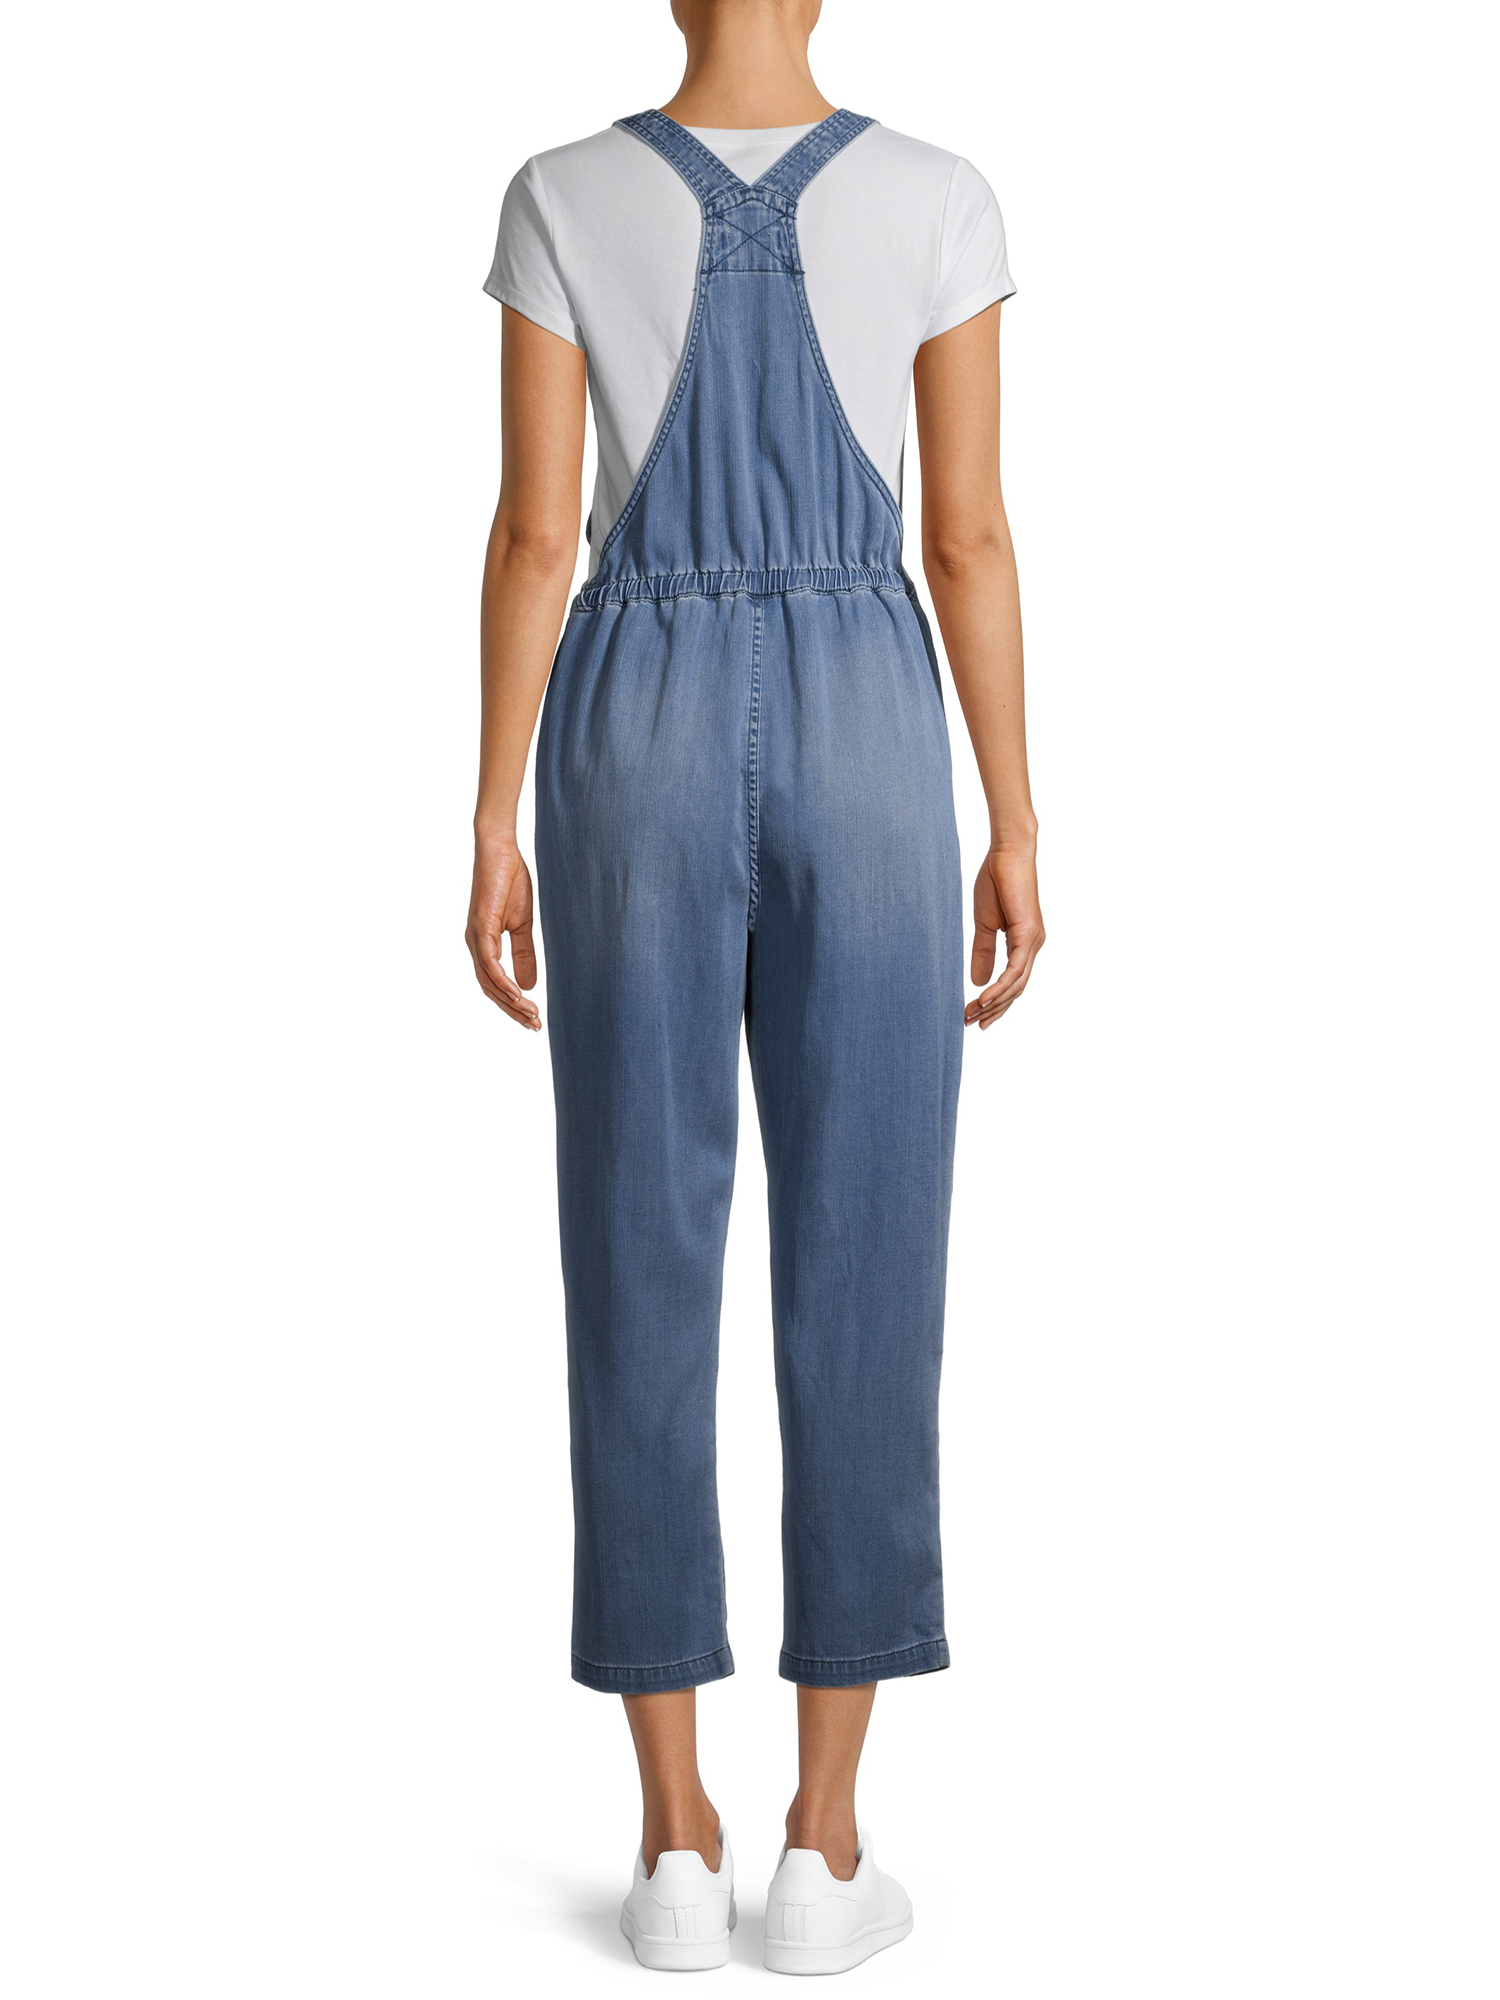 Time and Tru Women's Lightweight Soft Overalls - image 5 of 6